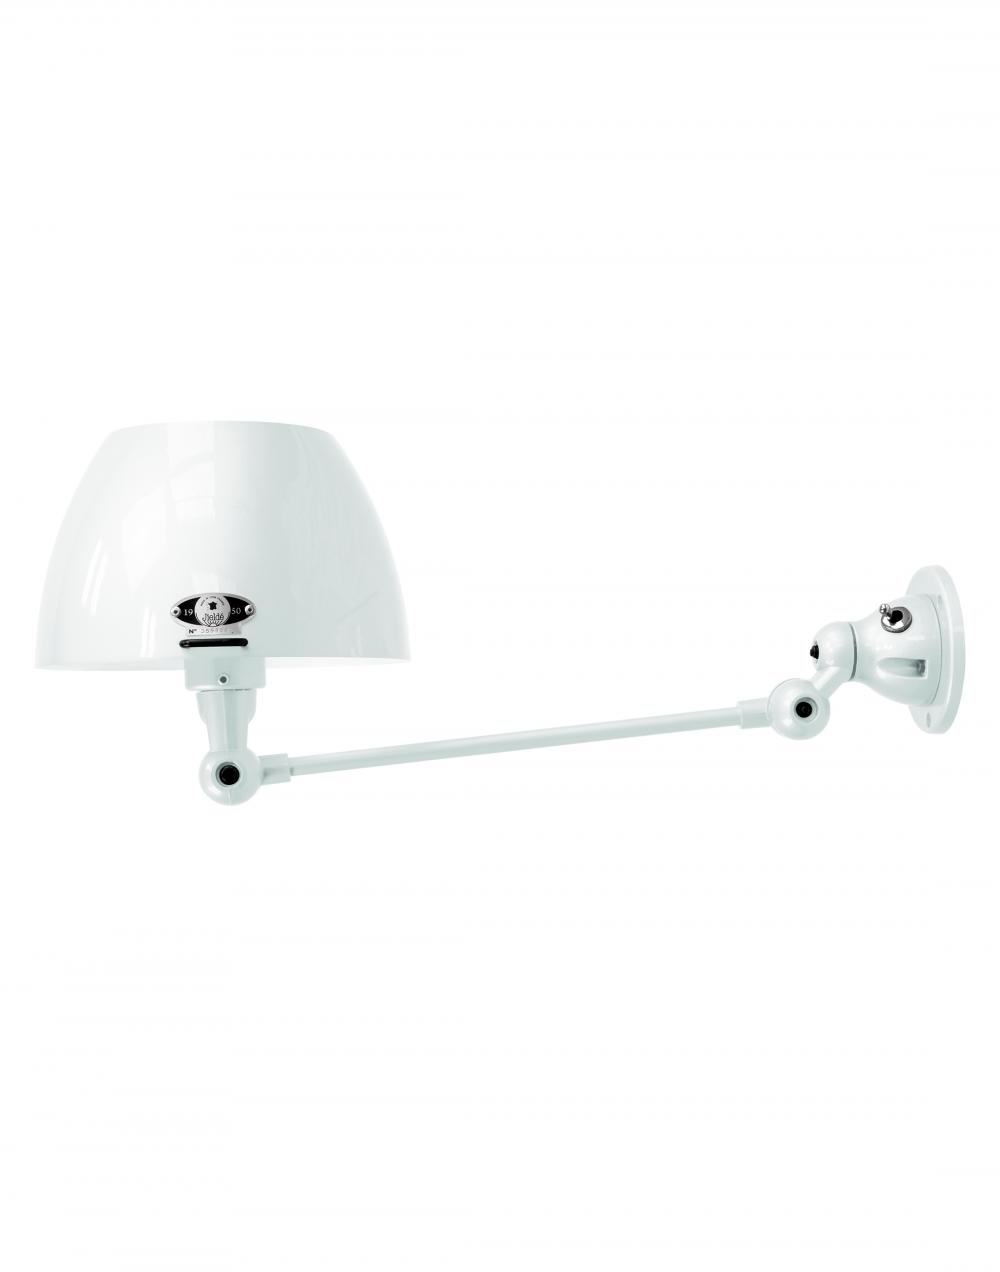 Jielde Aicler One Arm Adjustable Wall Light Curved Shade White Gloss Integral Switch On Base